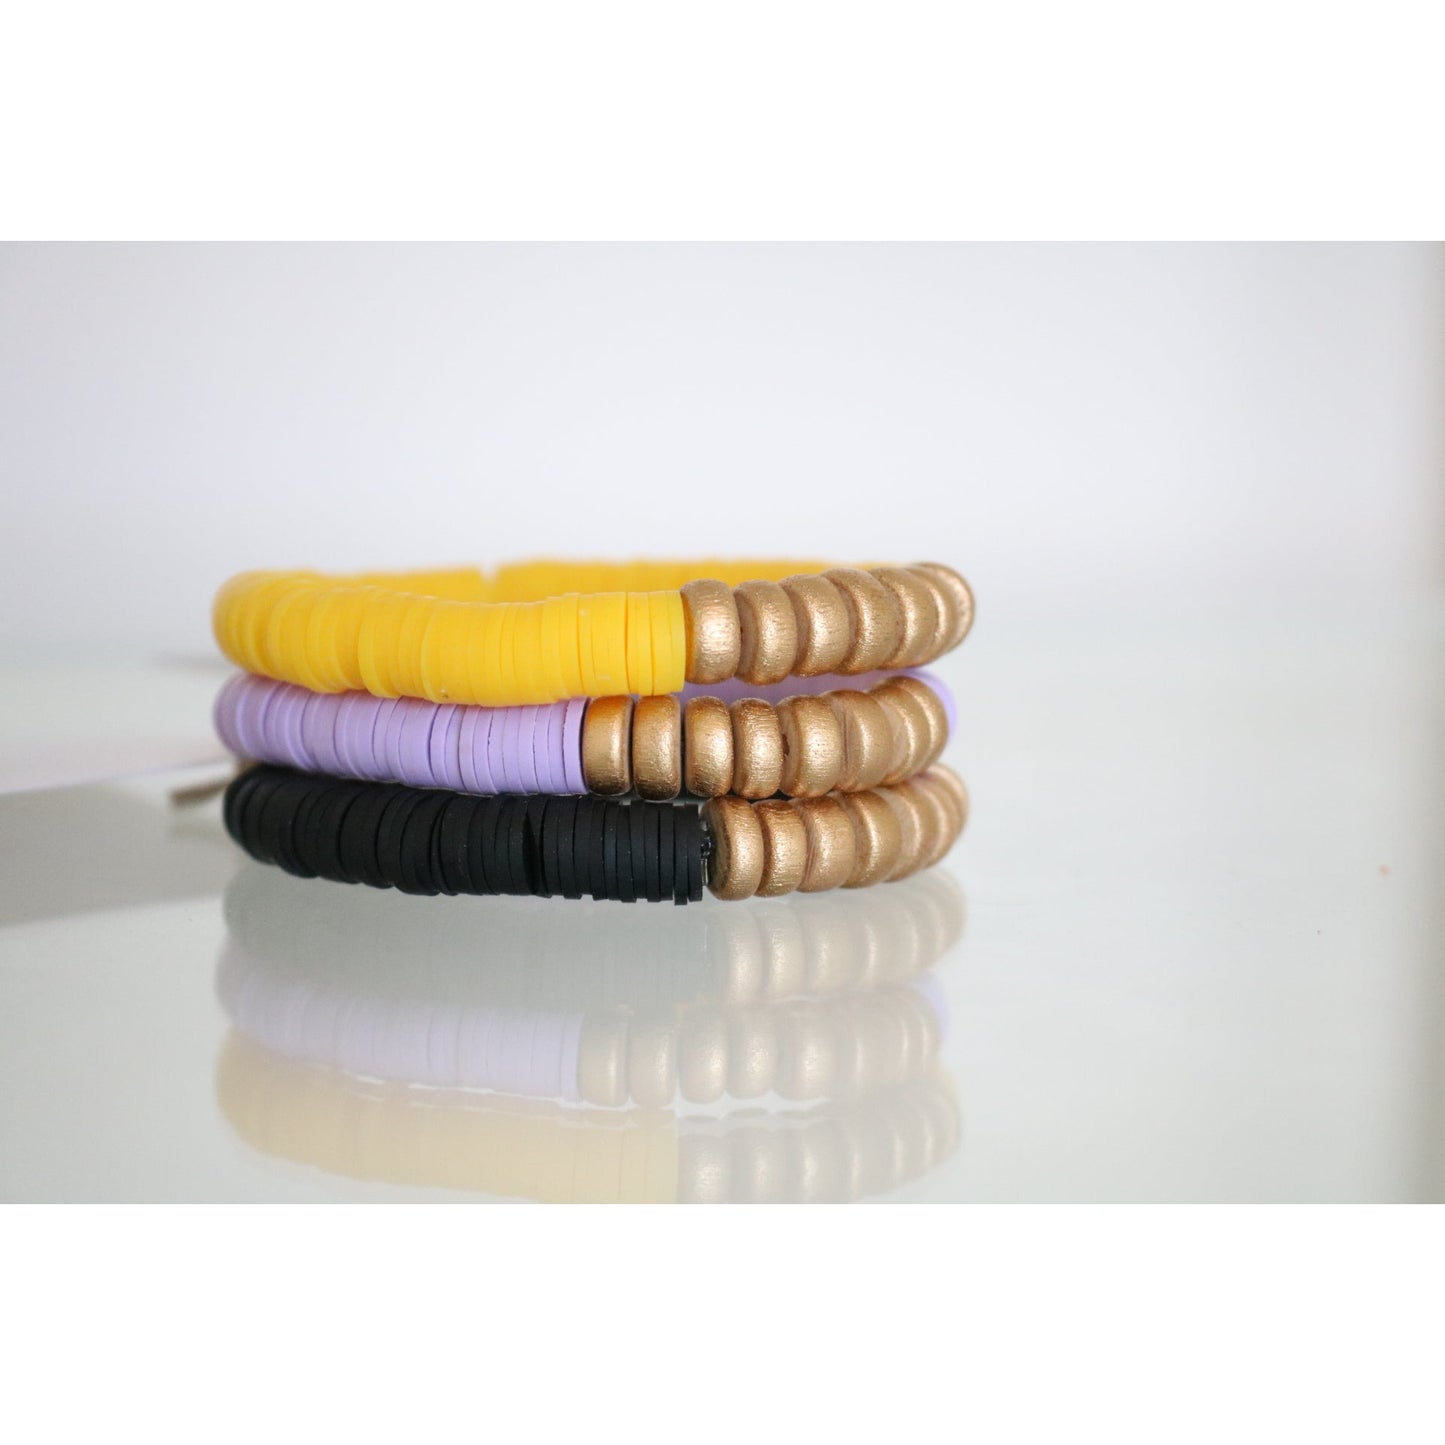 Purple, Golden Yellow, Black Gold Wood Polymer Stack - Set of 3